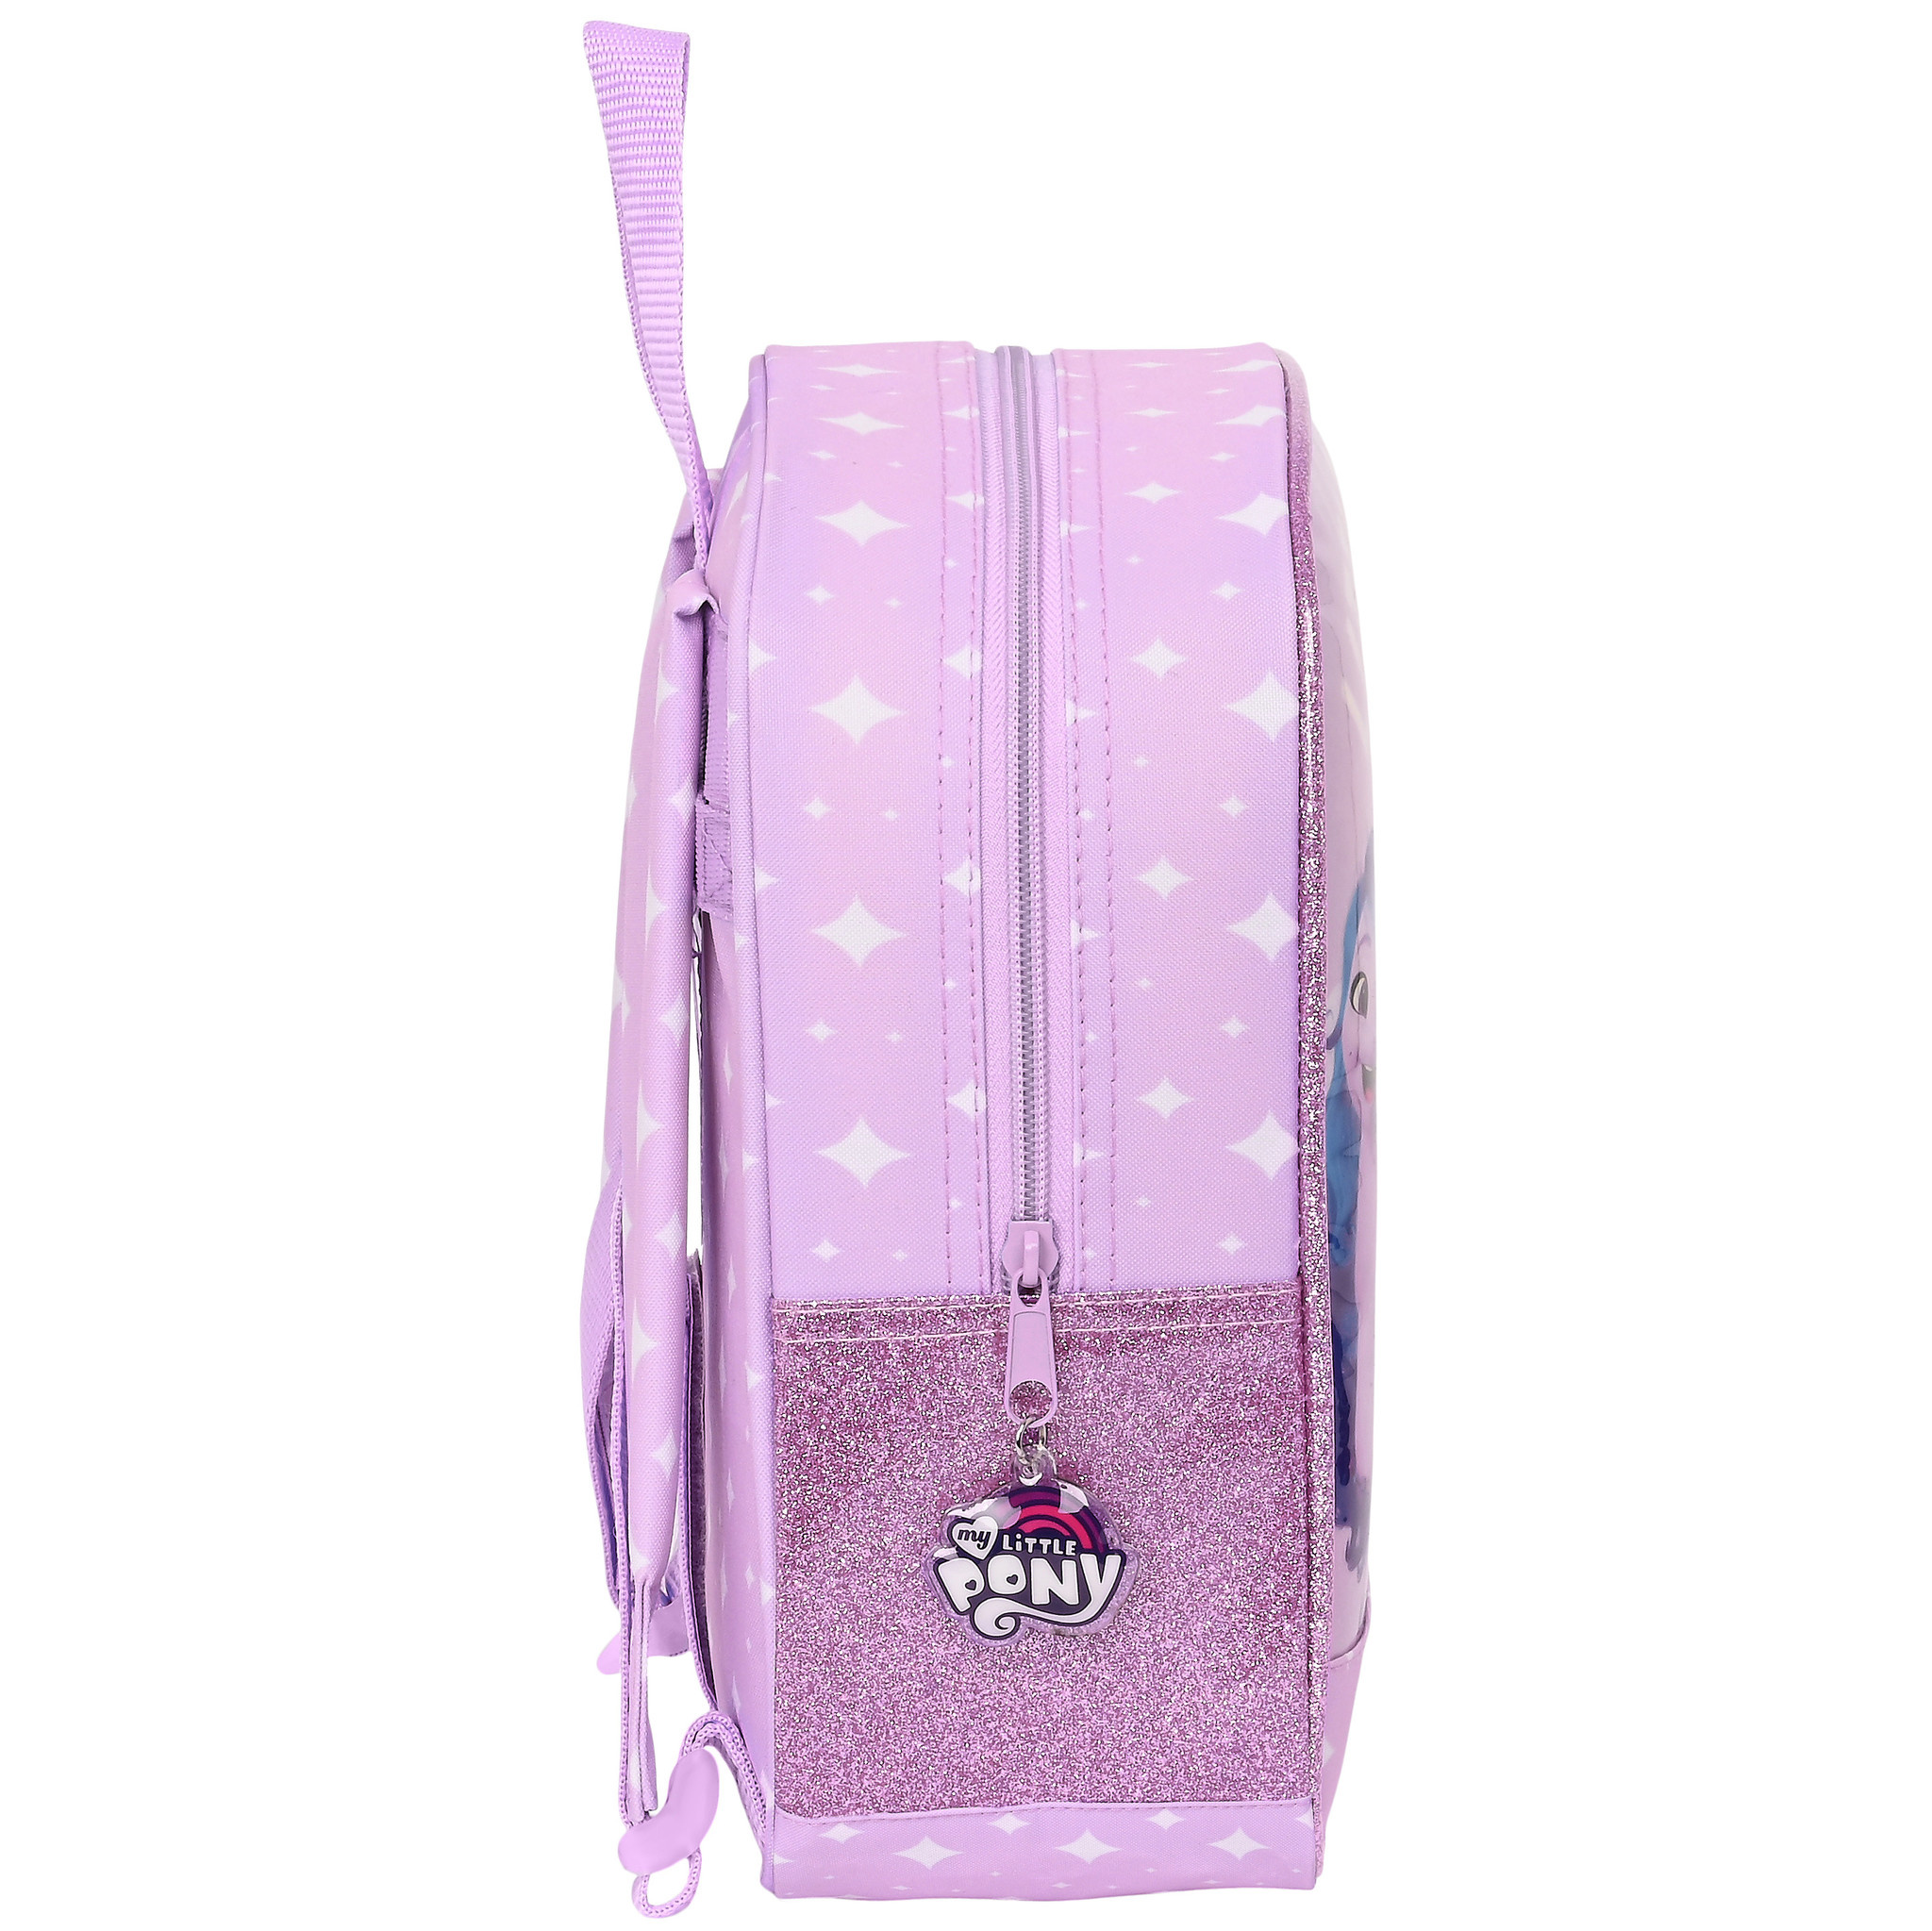 My little Pony Toddler backpack, #love - 27 x 22 x 10 cm - Polyester